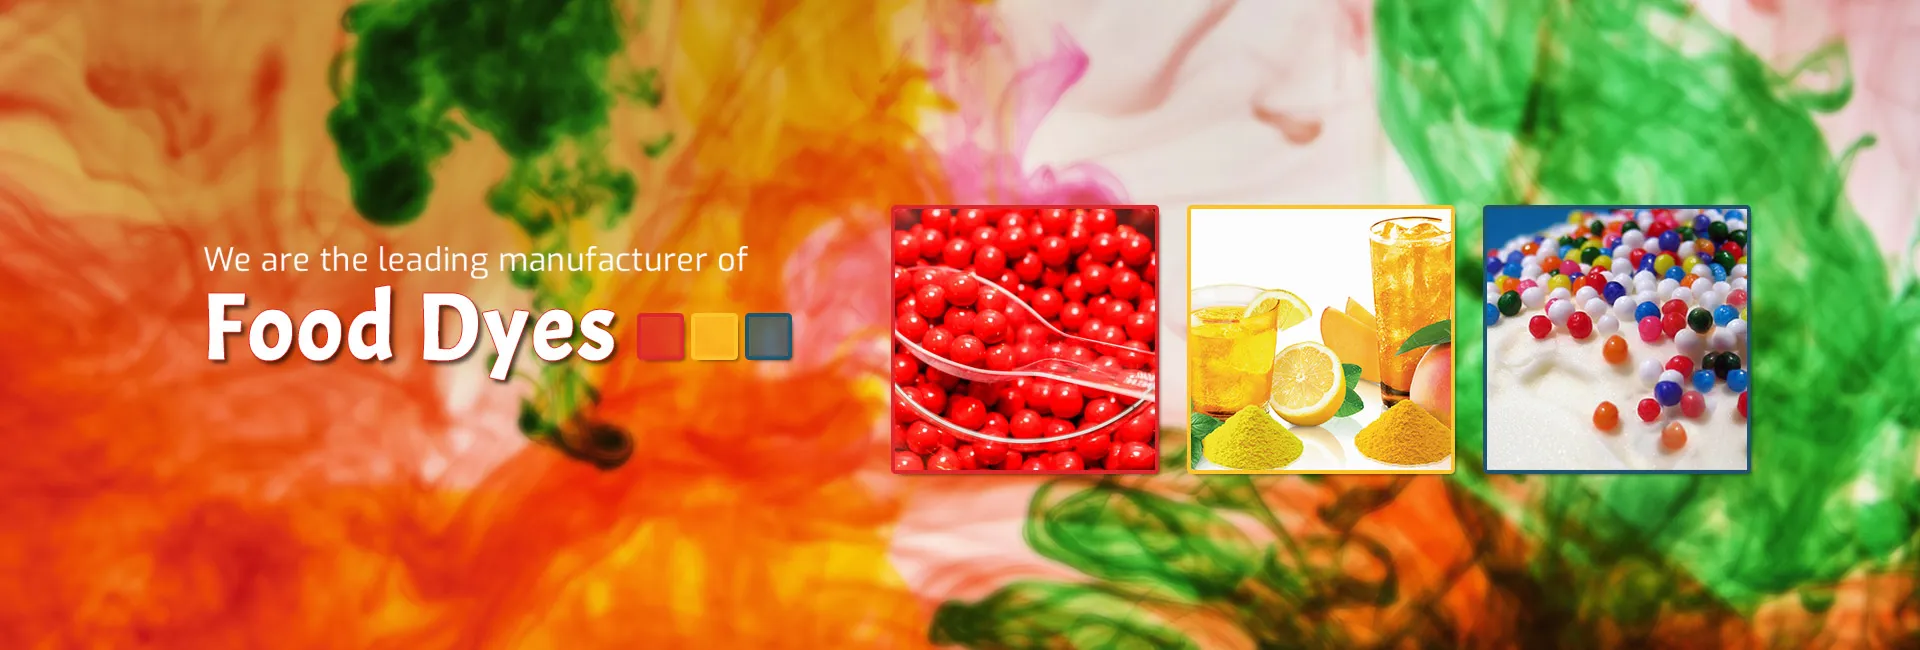 Food Dyes Manufacturer & Suppliers in Argentina